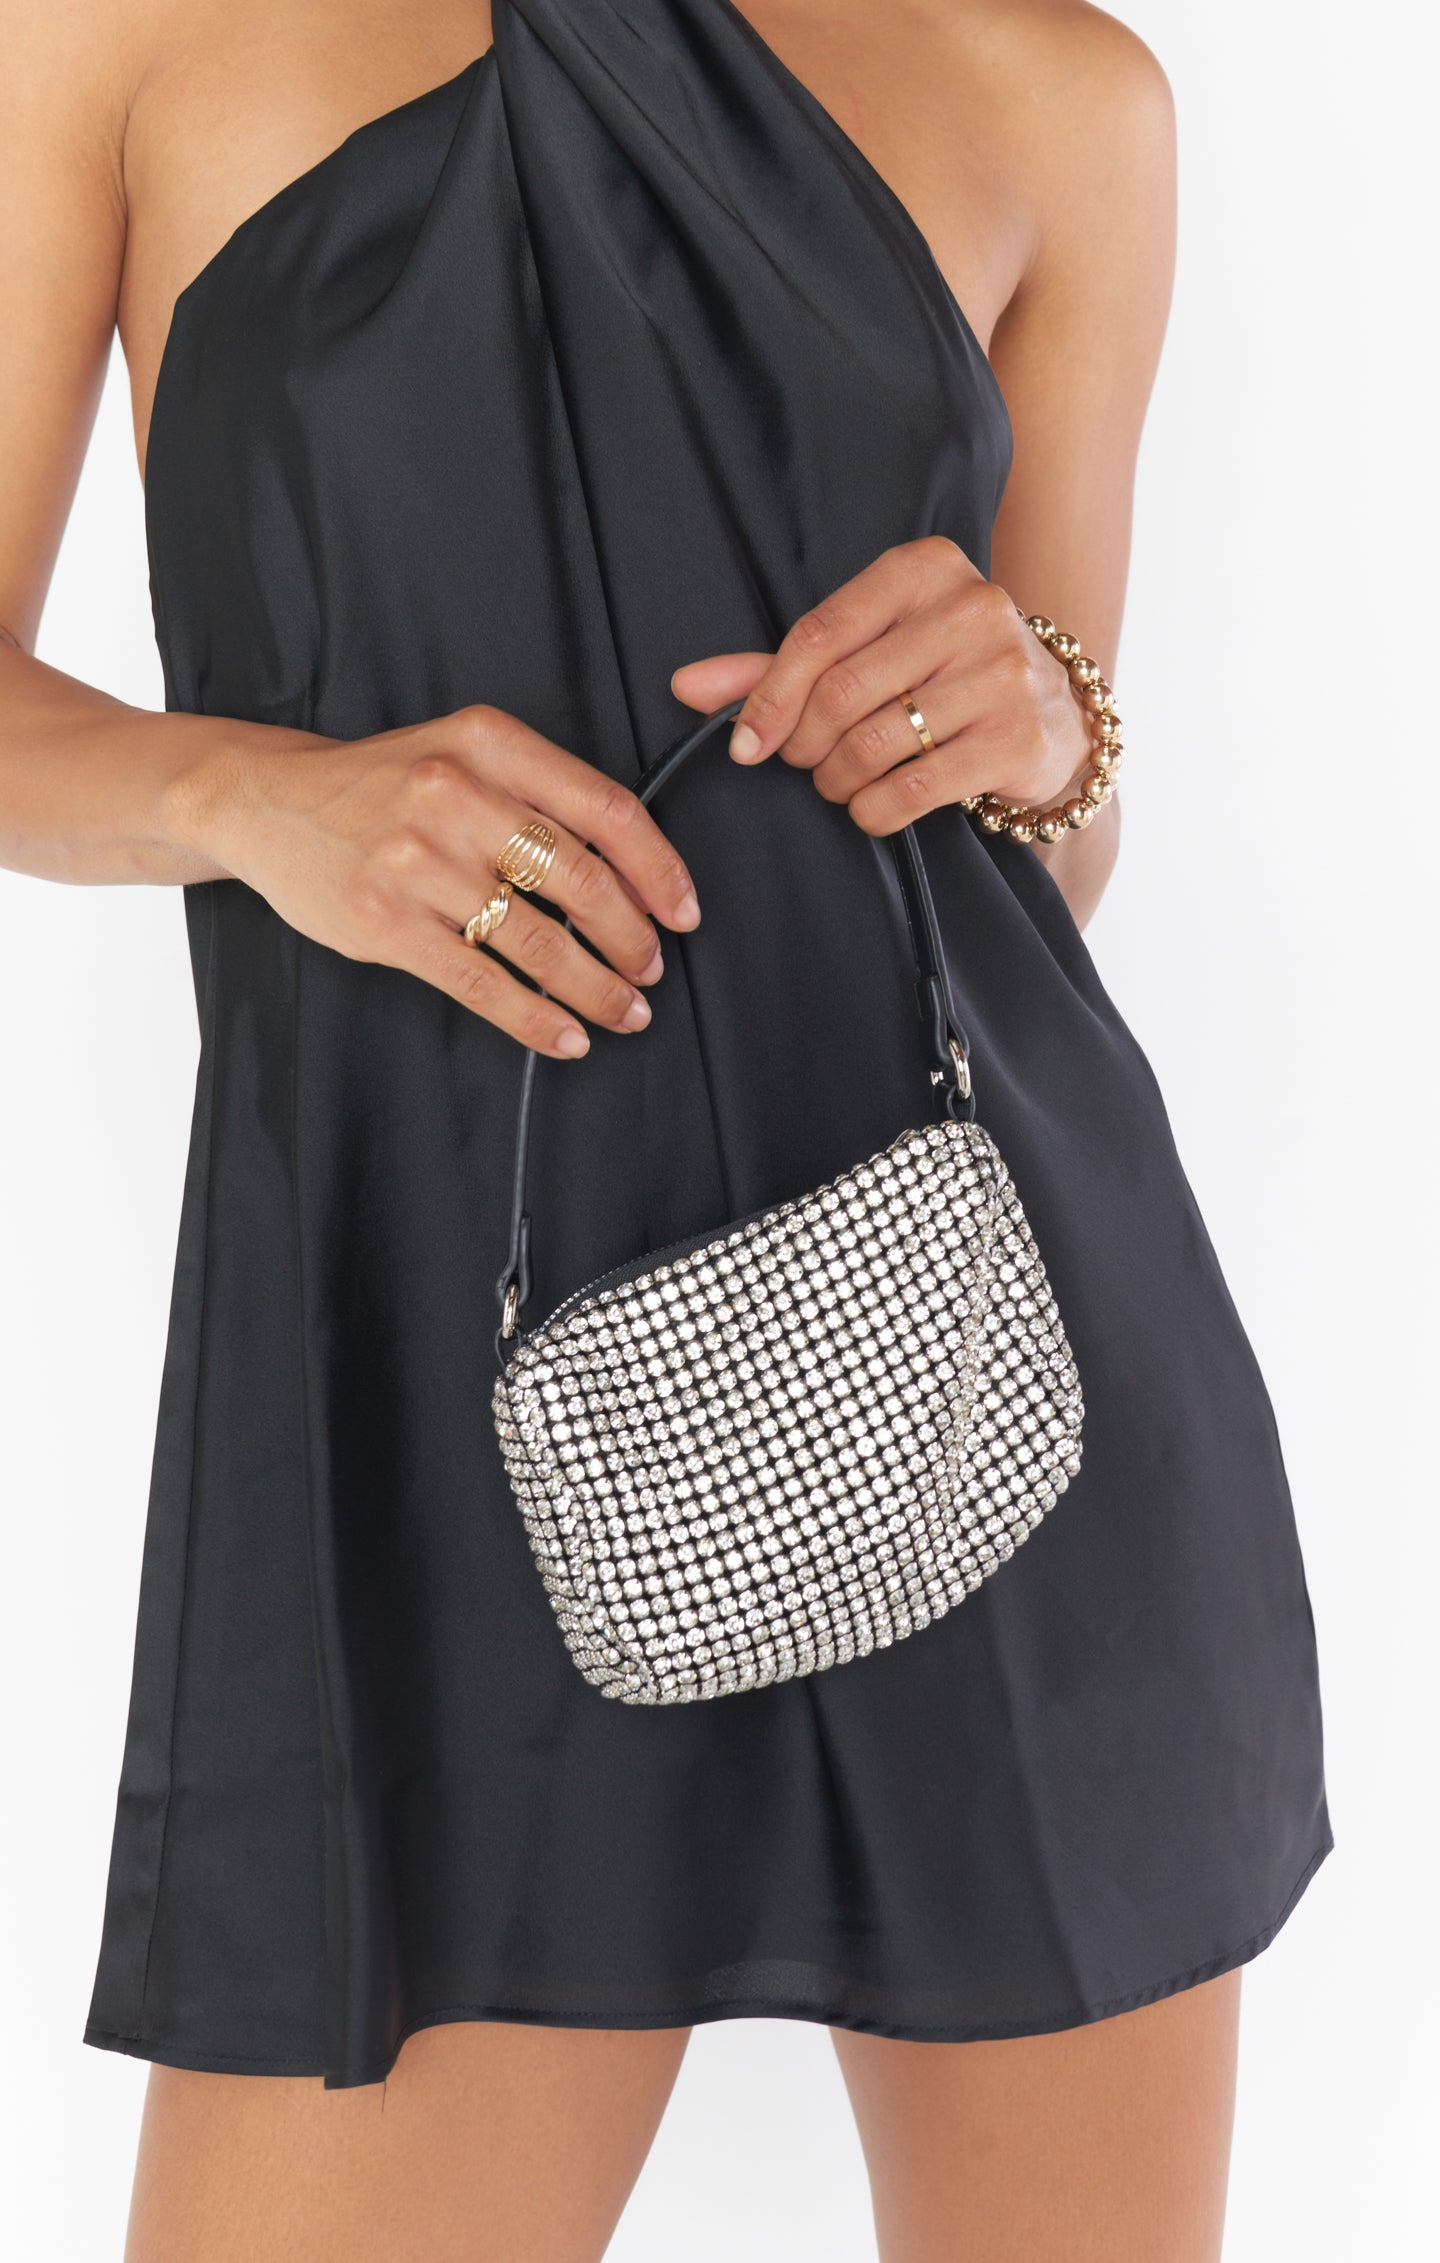 Show Me Your Shine Black/Silver Quilted Bag - BAG1682BK